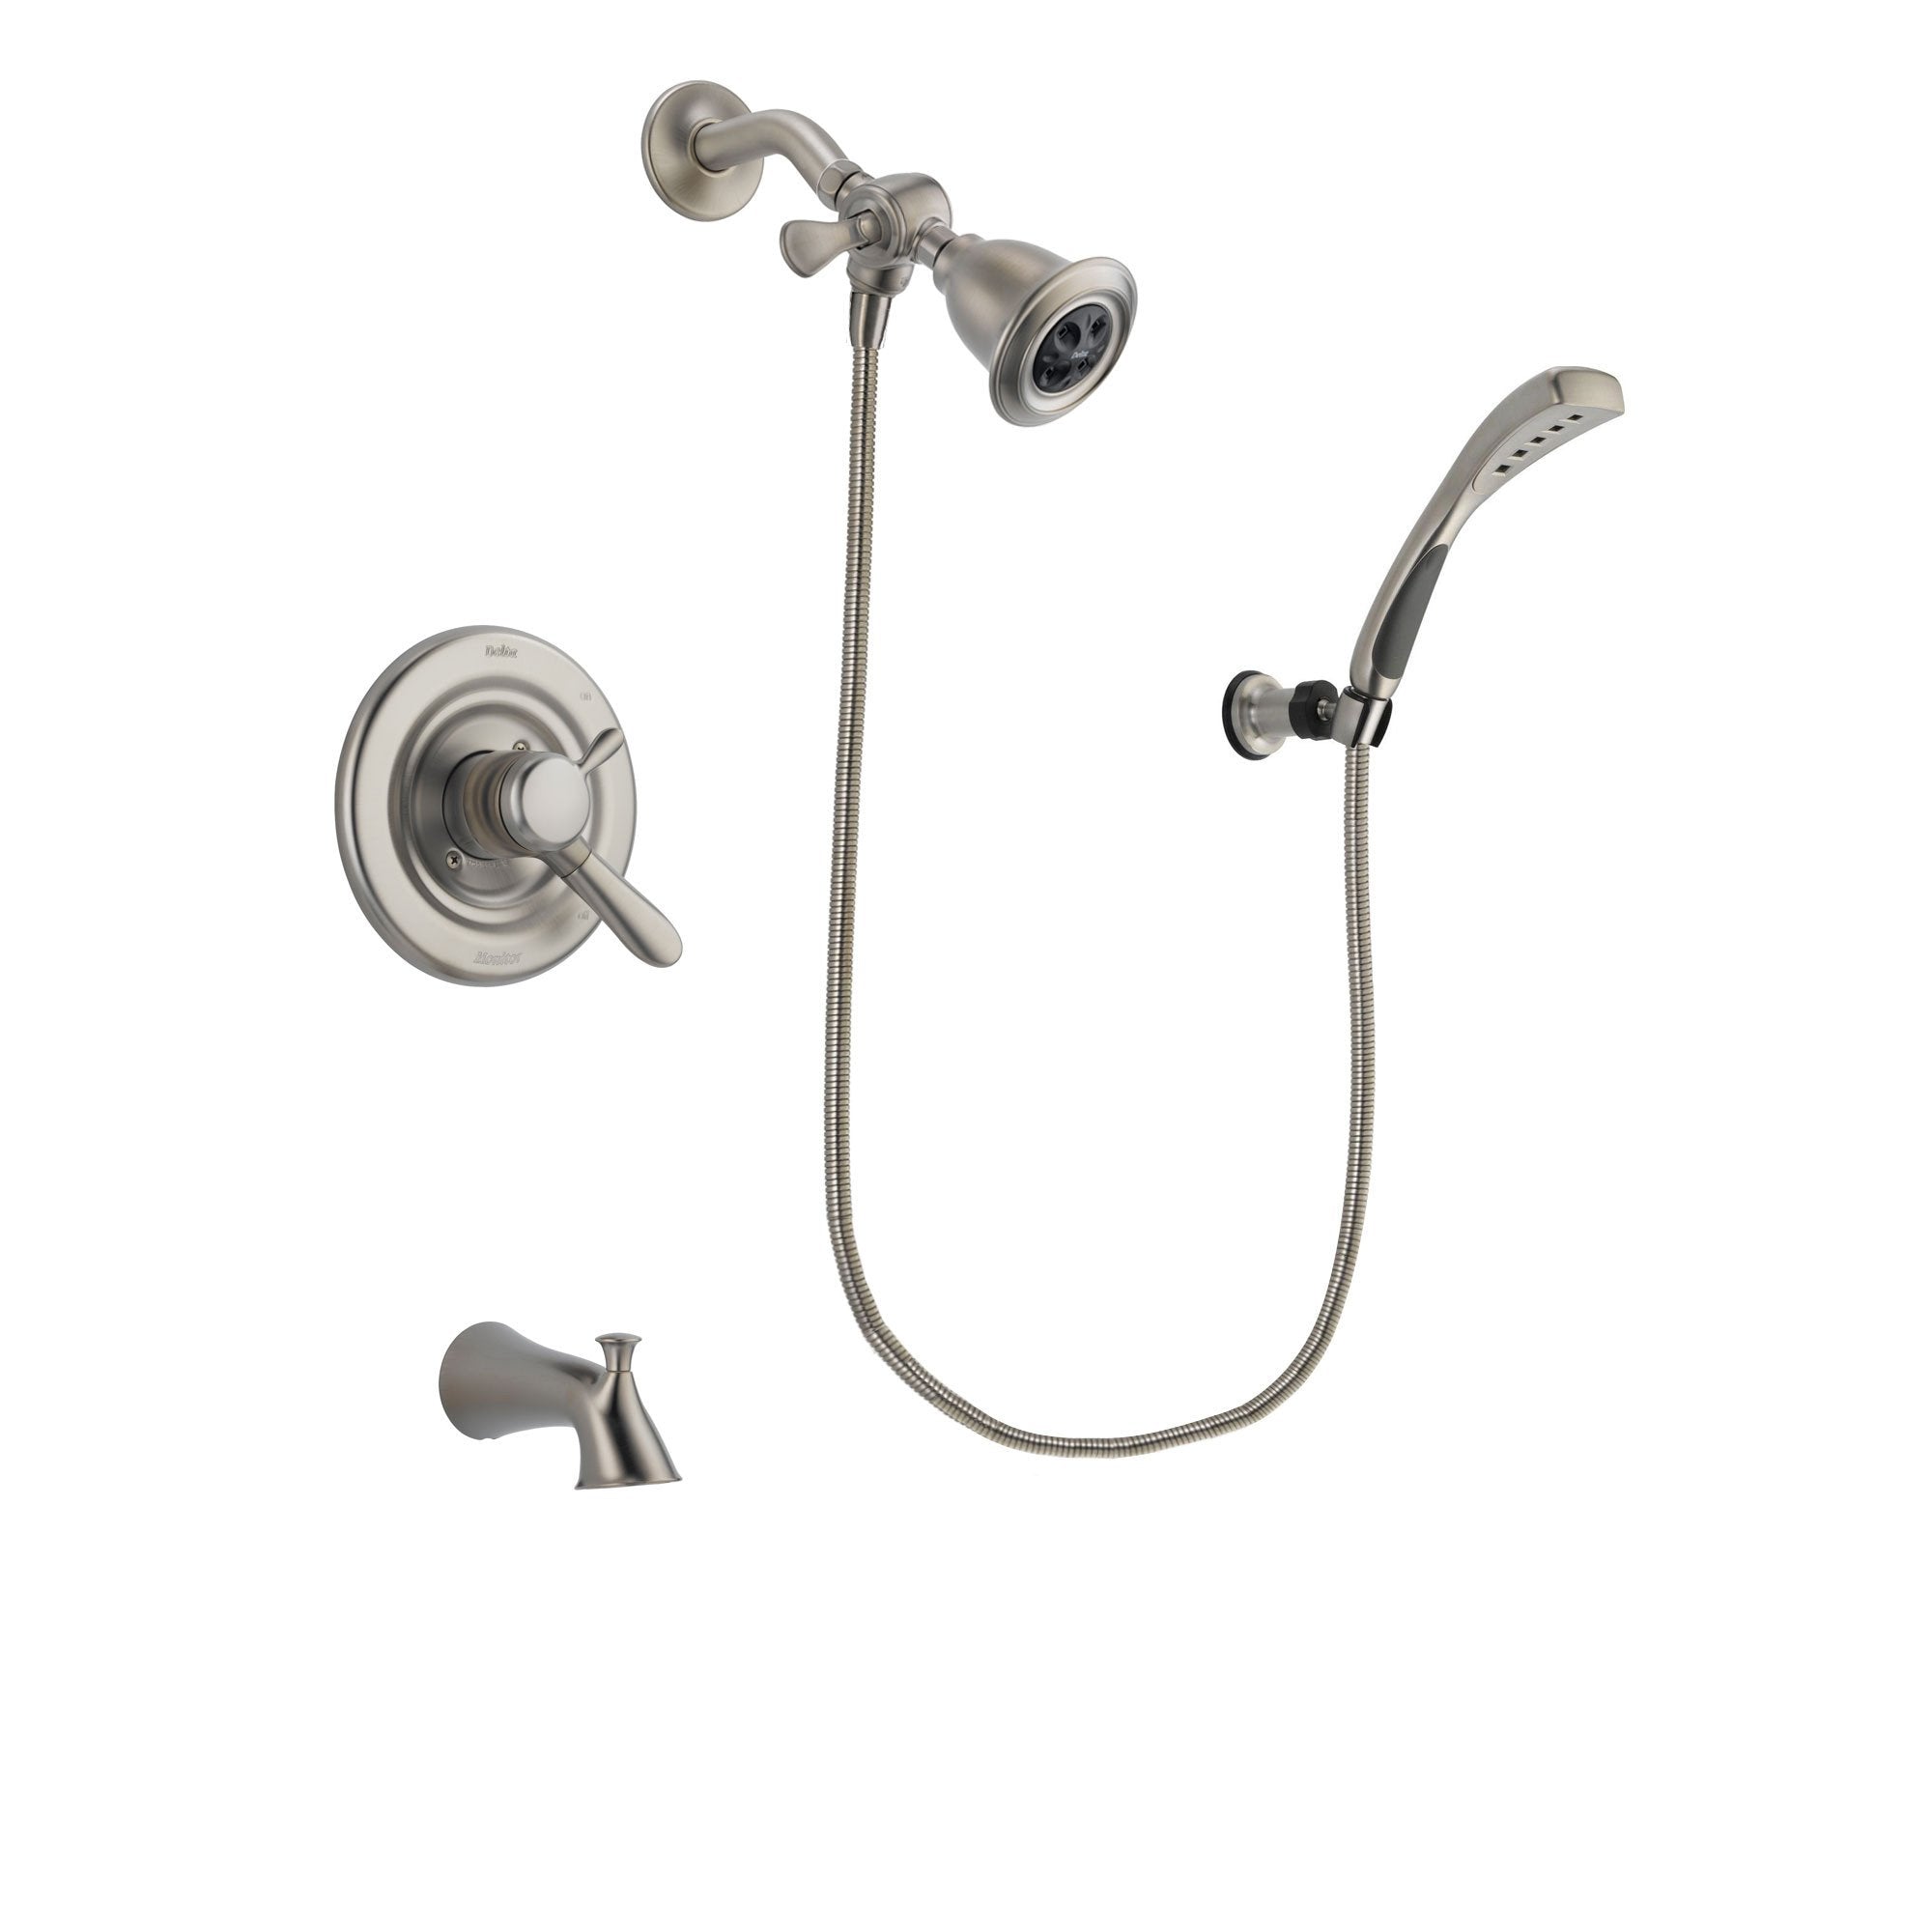 Delta Lahara Stainless Steel Finish Dual Control Tub and Shower Faucet System Package with Water Efficient Showerhead and Wall Mounted Handshower Includes Rough-in Valve and Tub Spout DSP1839V